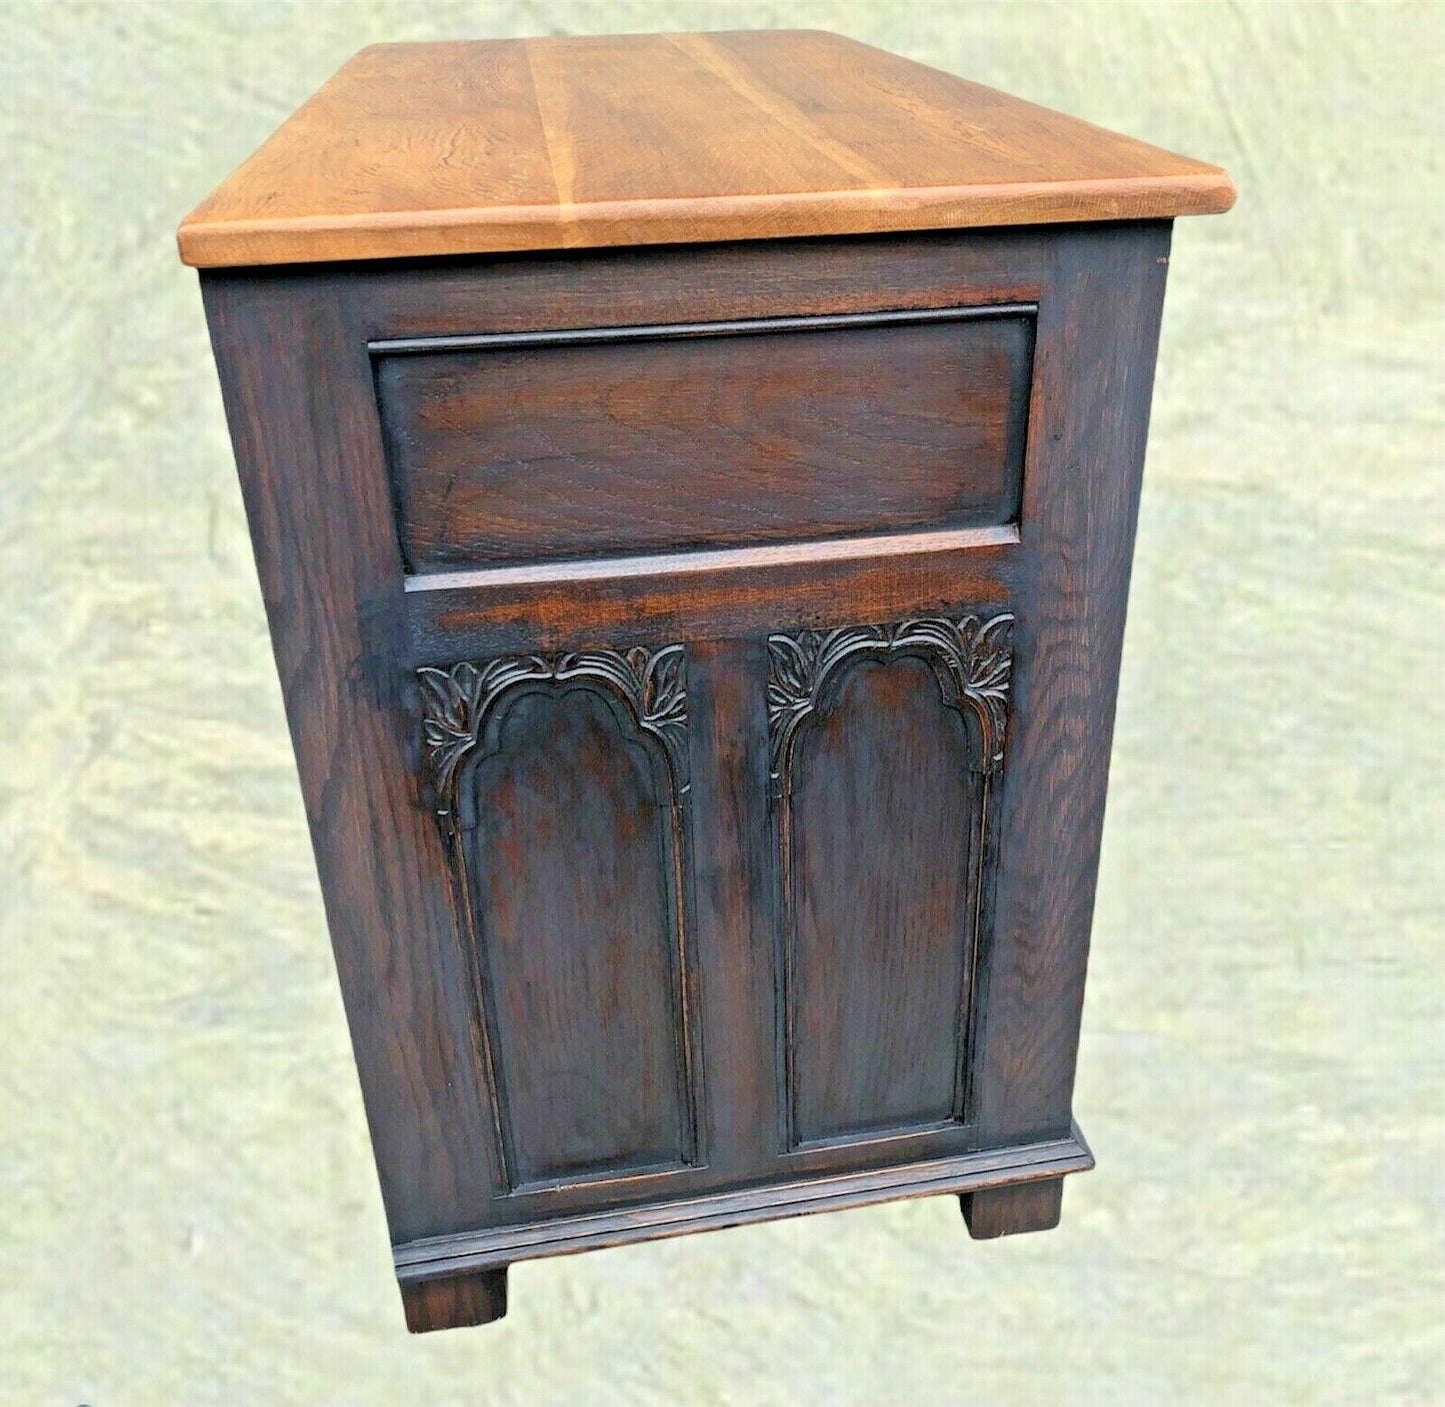 Gothic Style Oak Chest Of Drawers By Old Charm ( SOLD )